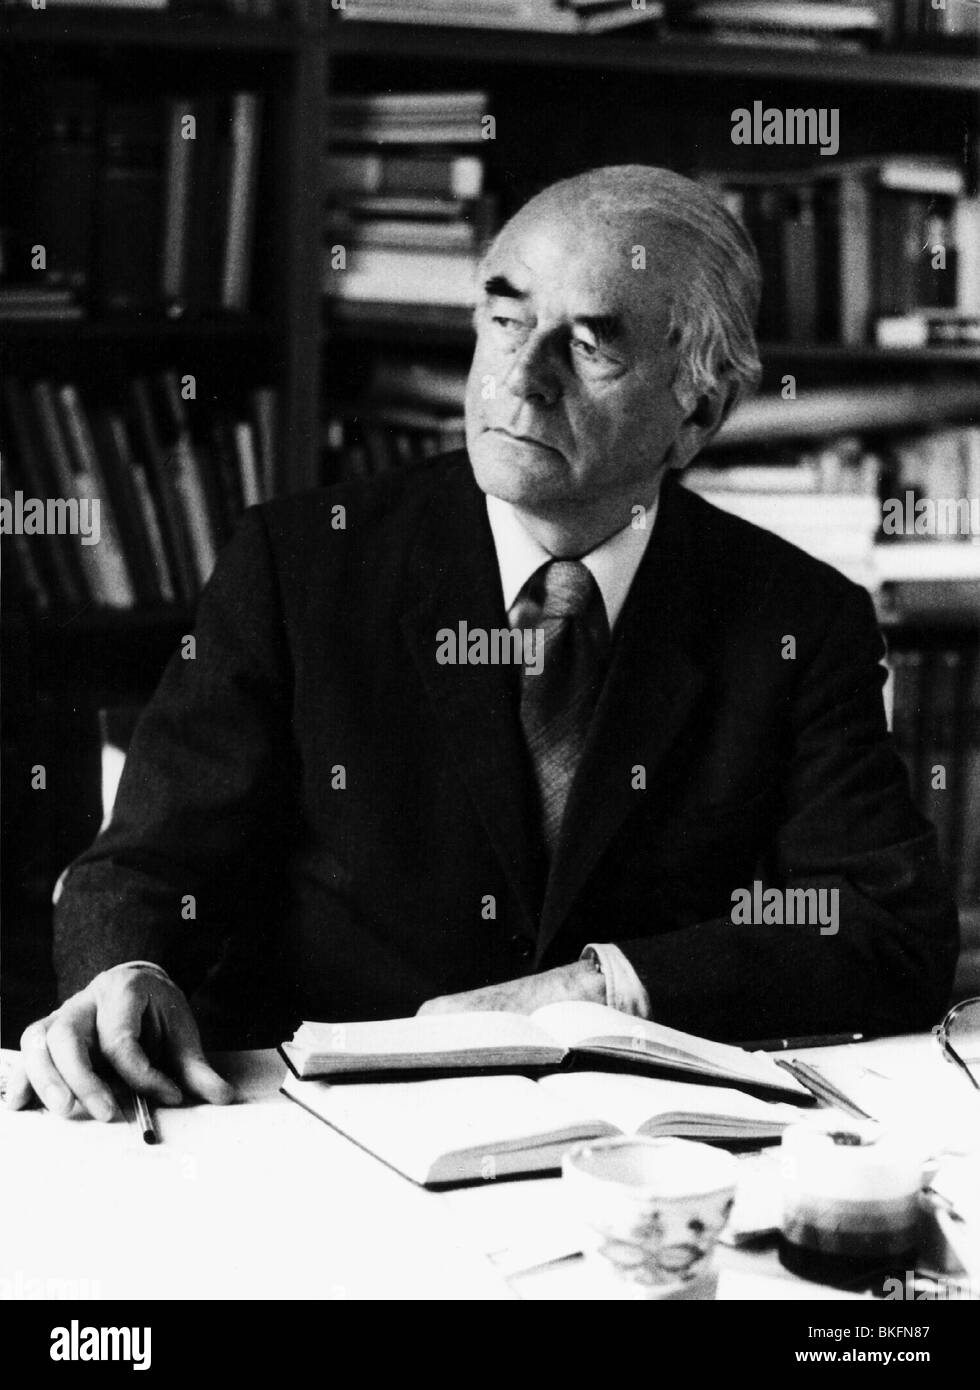 Speer, Albert, 19.3.1905 - 1.9.1981, German architect, politician (NSDAP), Minister of Armaments and War Production in Nazi Germany 1942 - 1945, half length, sitting at desk, half length, 1970s, , Stock Photo